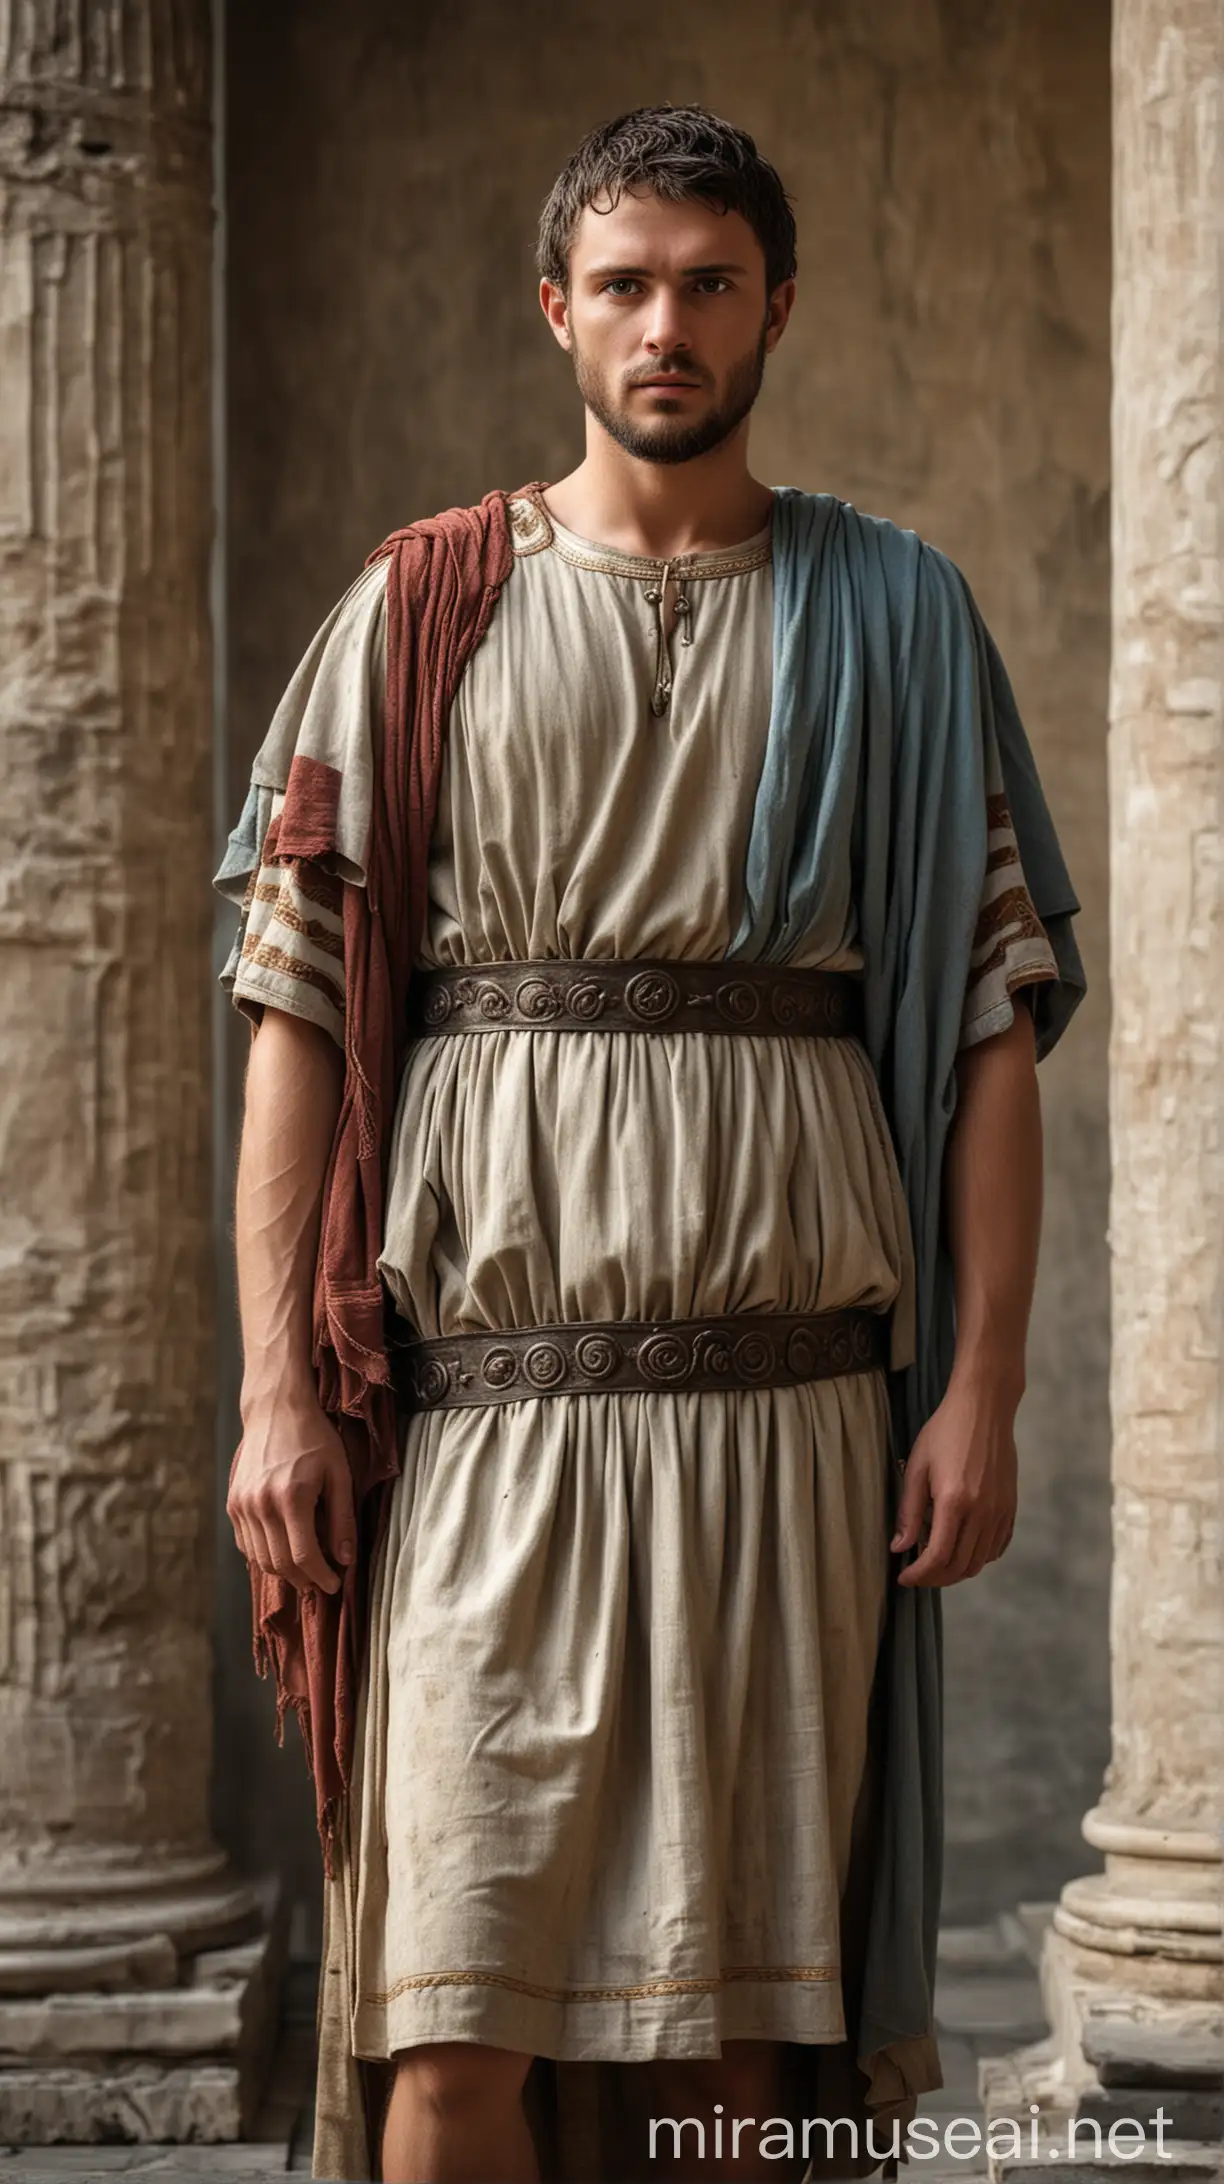 A portrait of Quartus, an early Christian, dressed in simple ancient Roman clothing, with a serene expression, standing against a backdrop of the 1st century AD." In ancient world 